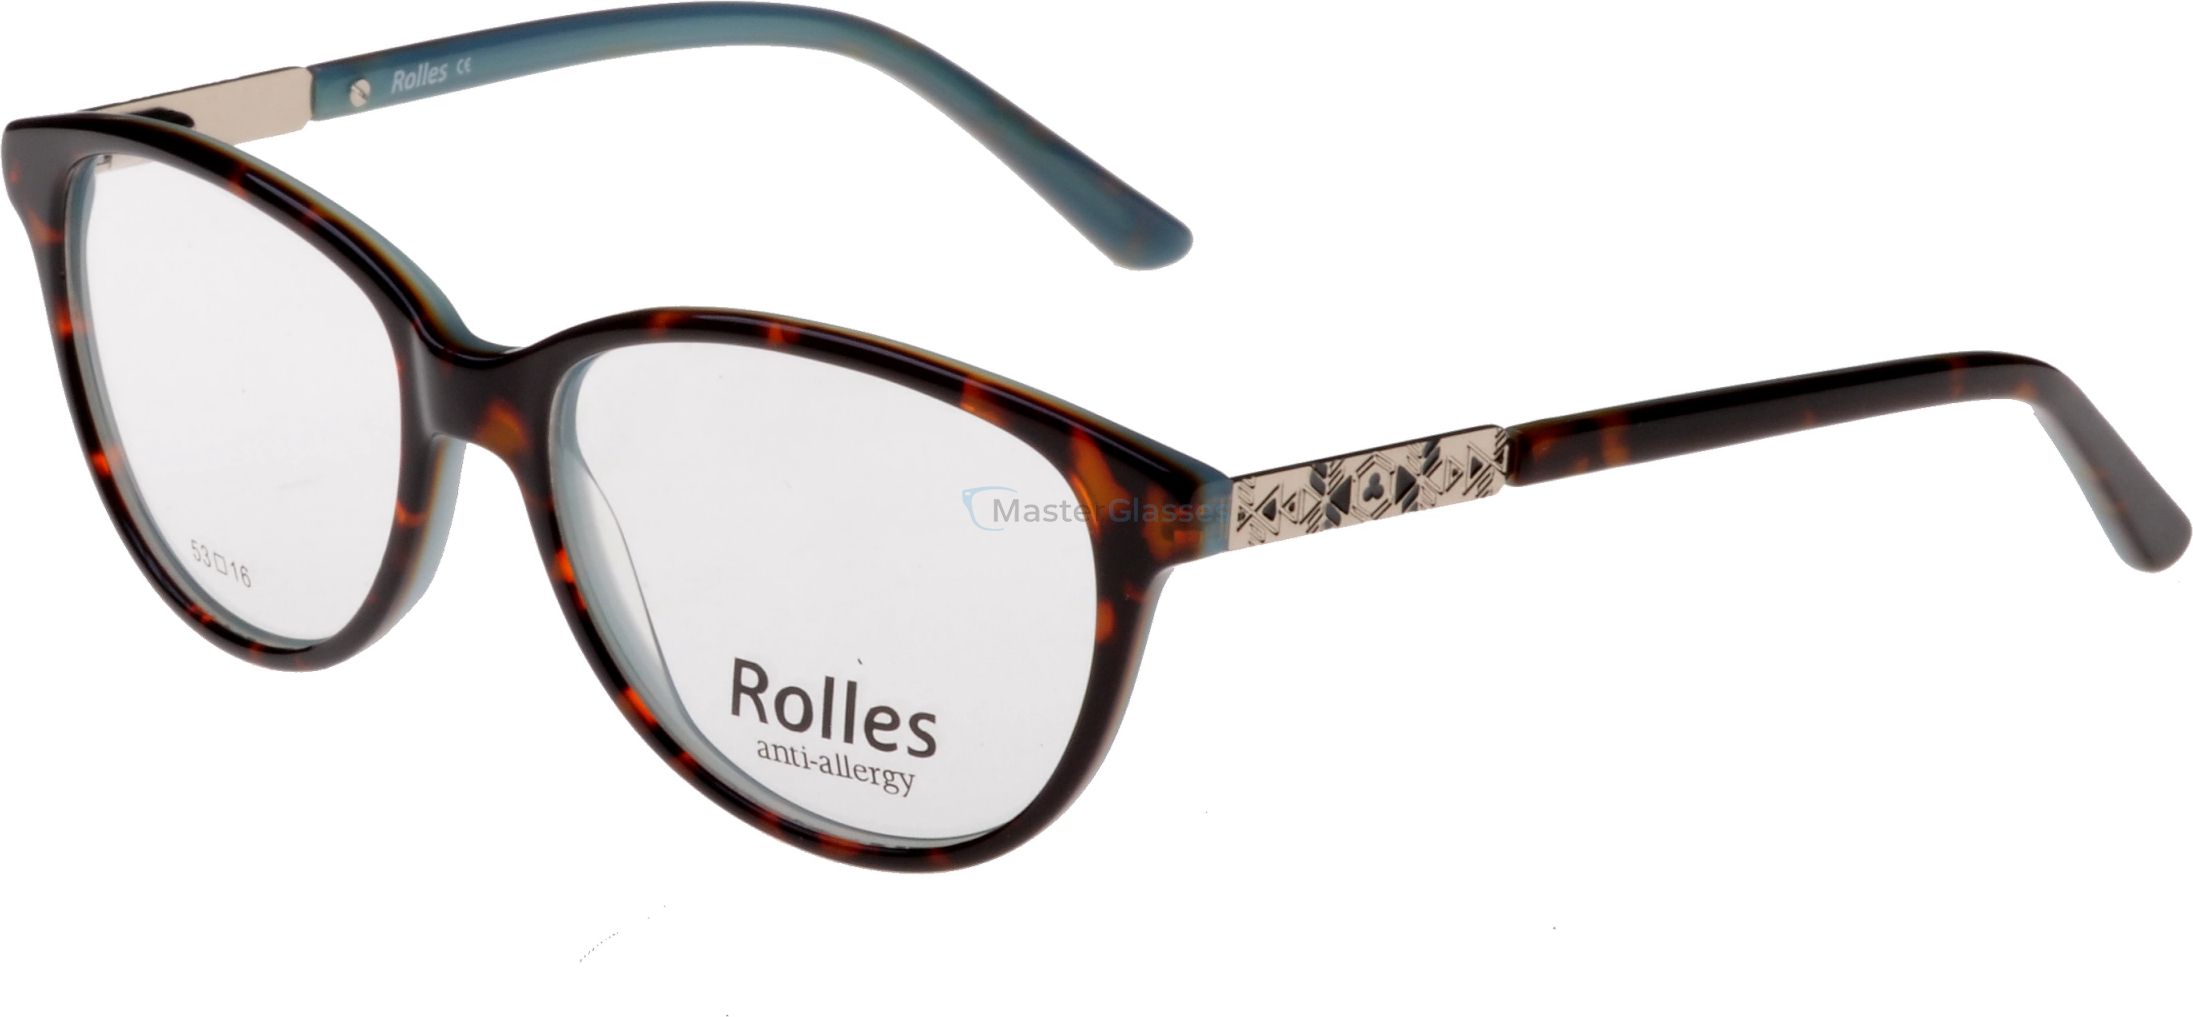  Rolles 408 03